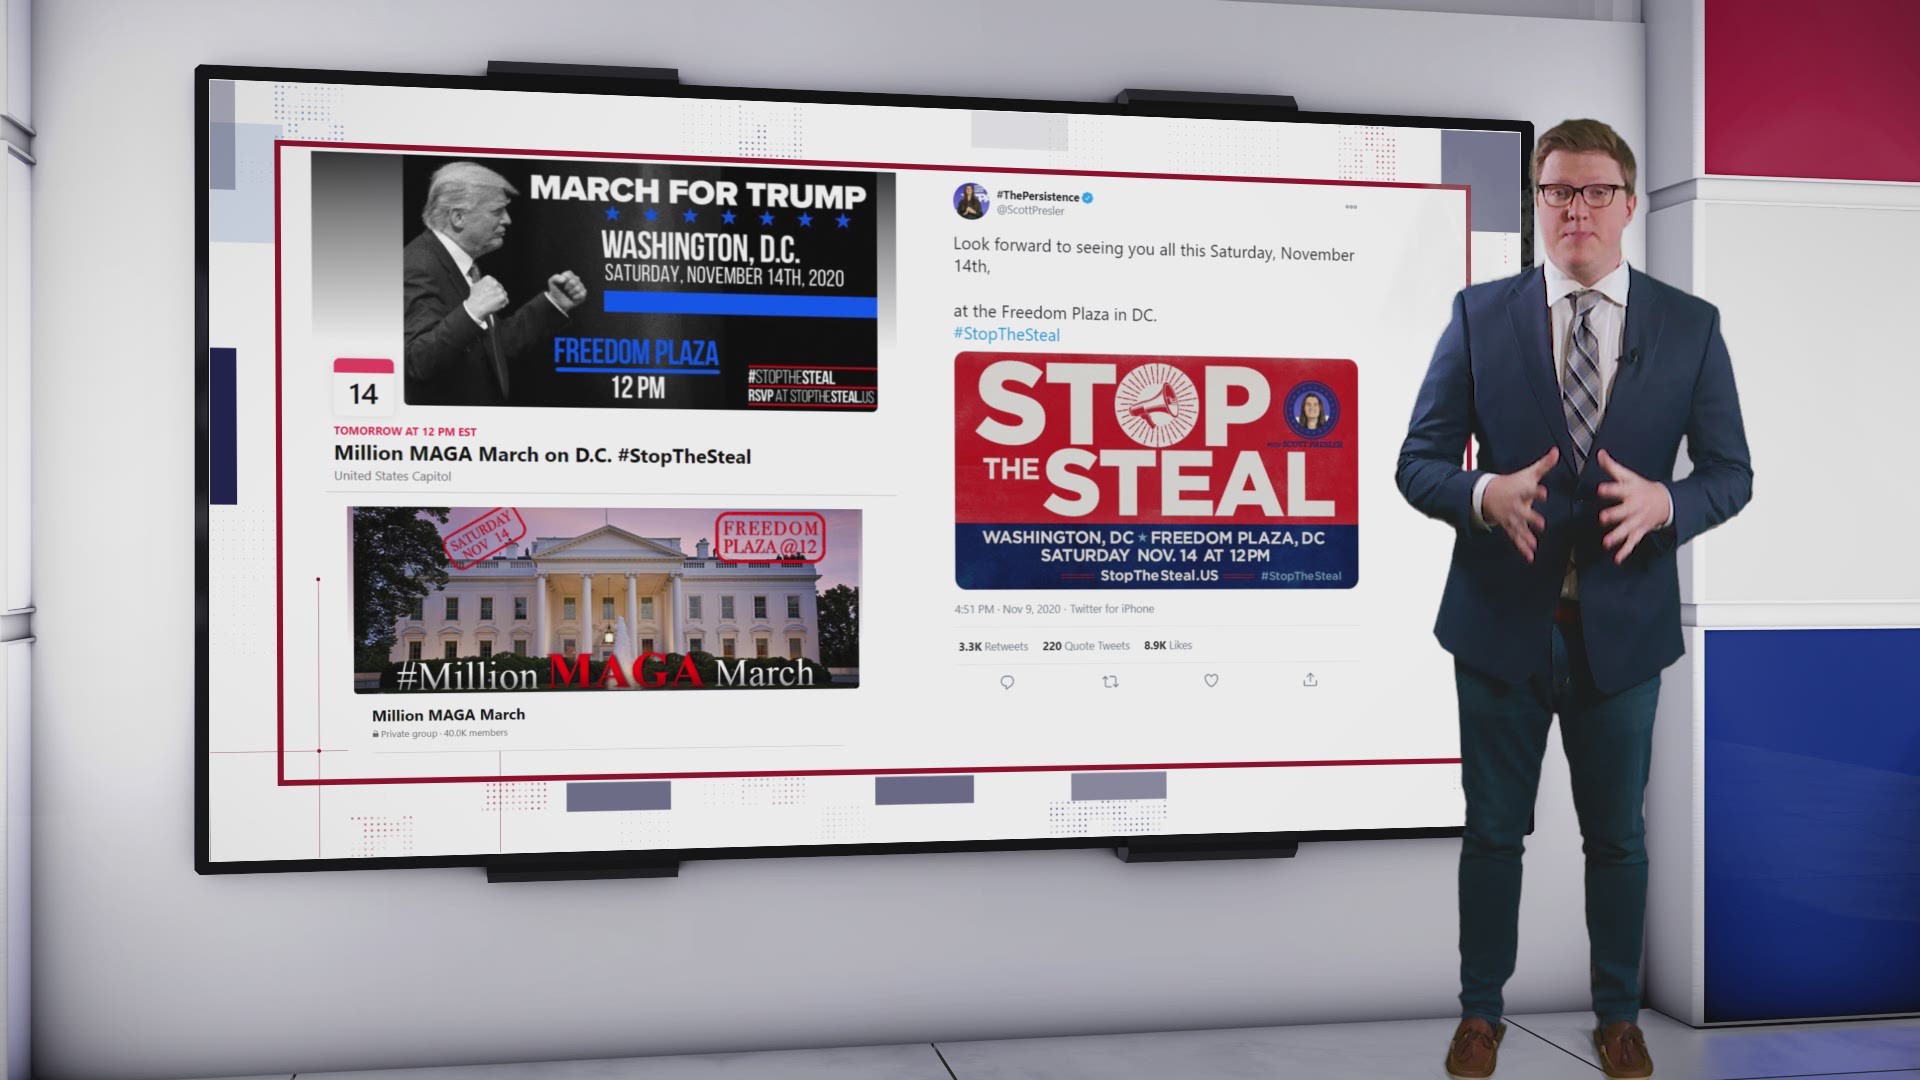 The VERIFY team took on some of the most common claims made by people rallying around the 'stop the steal' slogan nationwide this weekend.